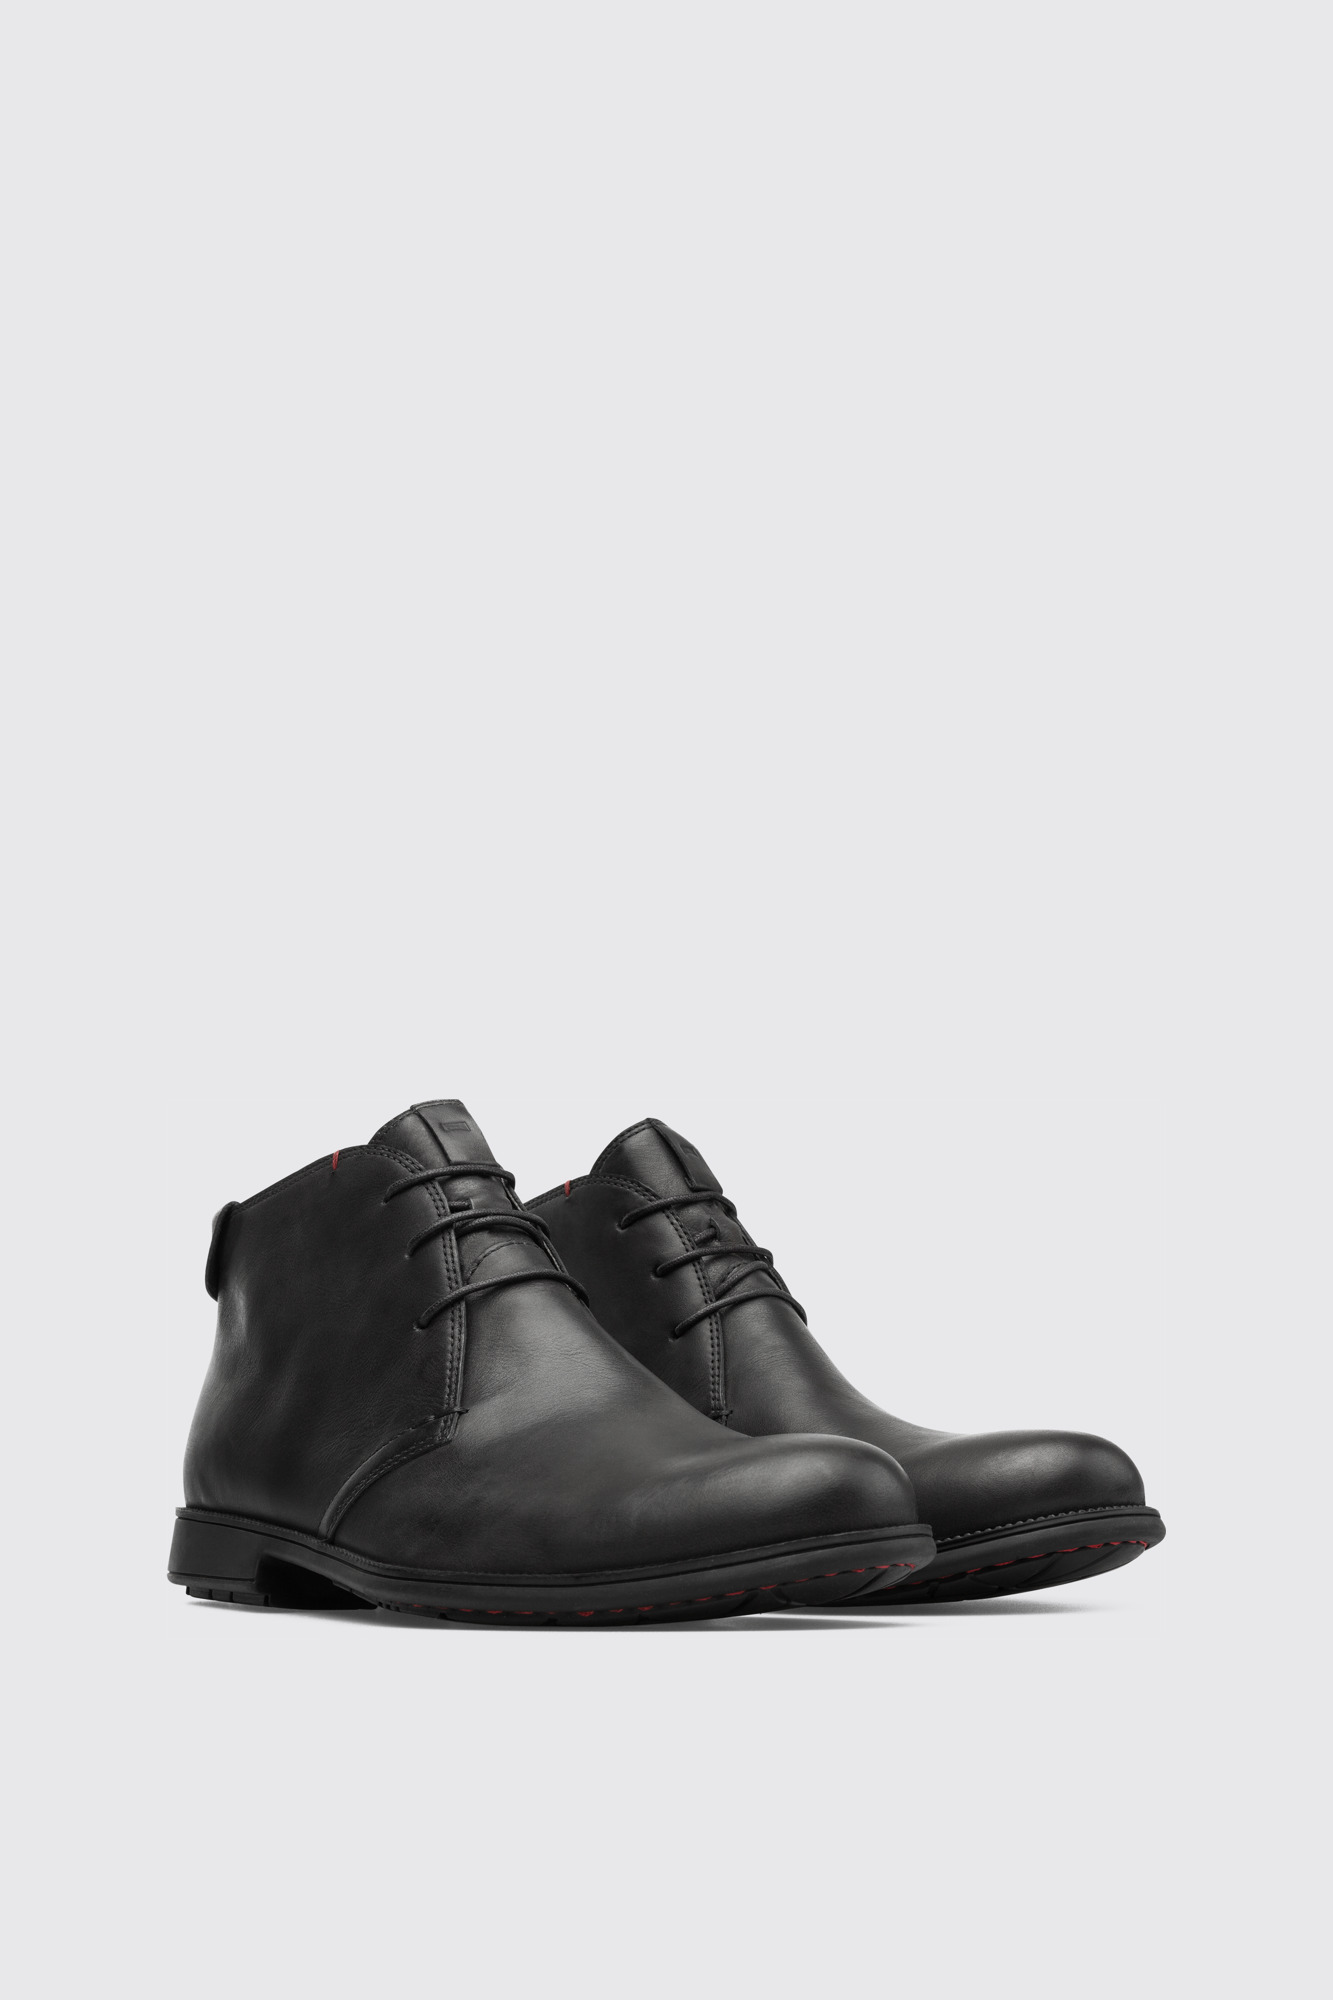 Taille Pakistaans Huh Neuman Black Ankle Boots for Men - Spring/Summer collection - Camper USA